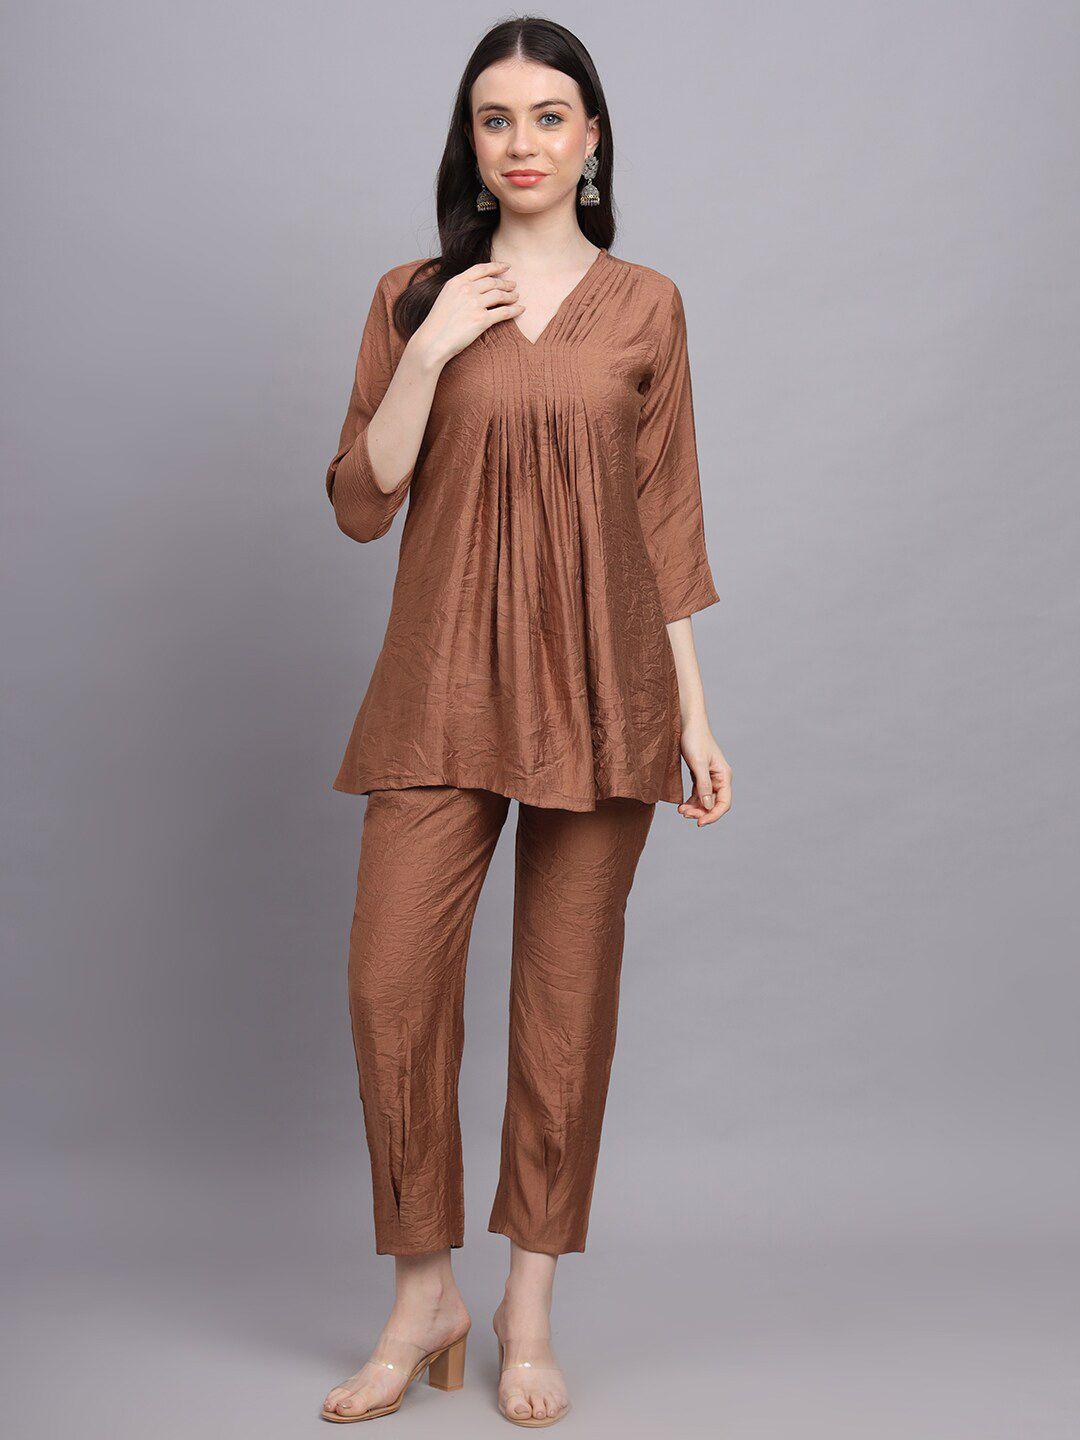 fabdyor top with trousers co-ords